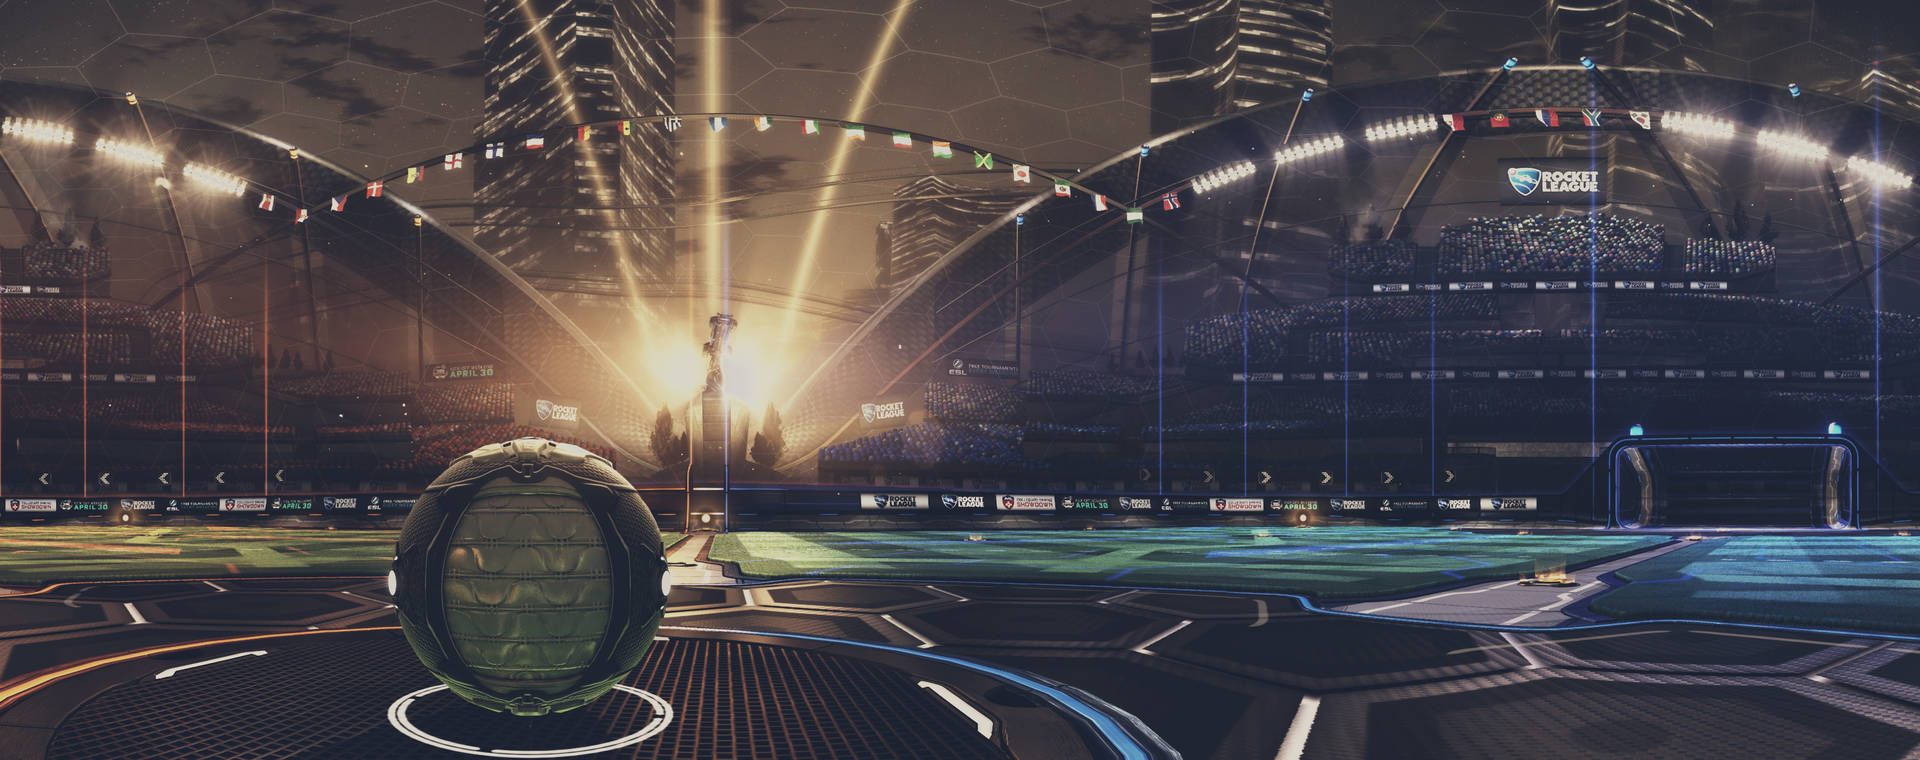 Cool Rocket League Ball In The Arena Background